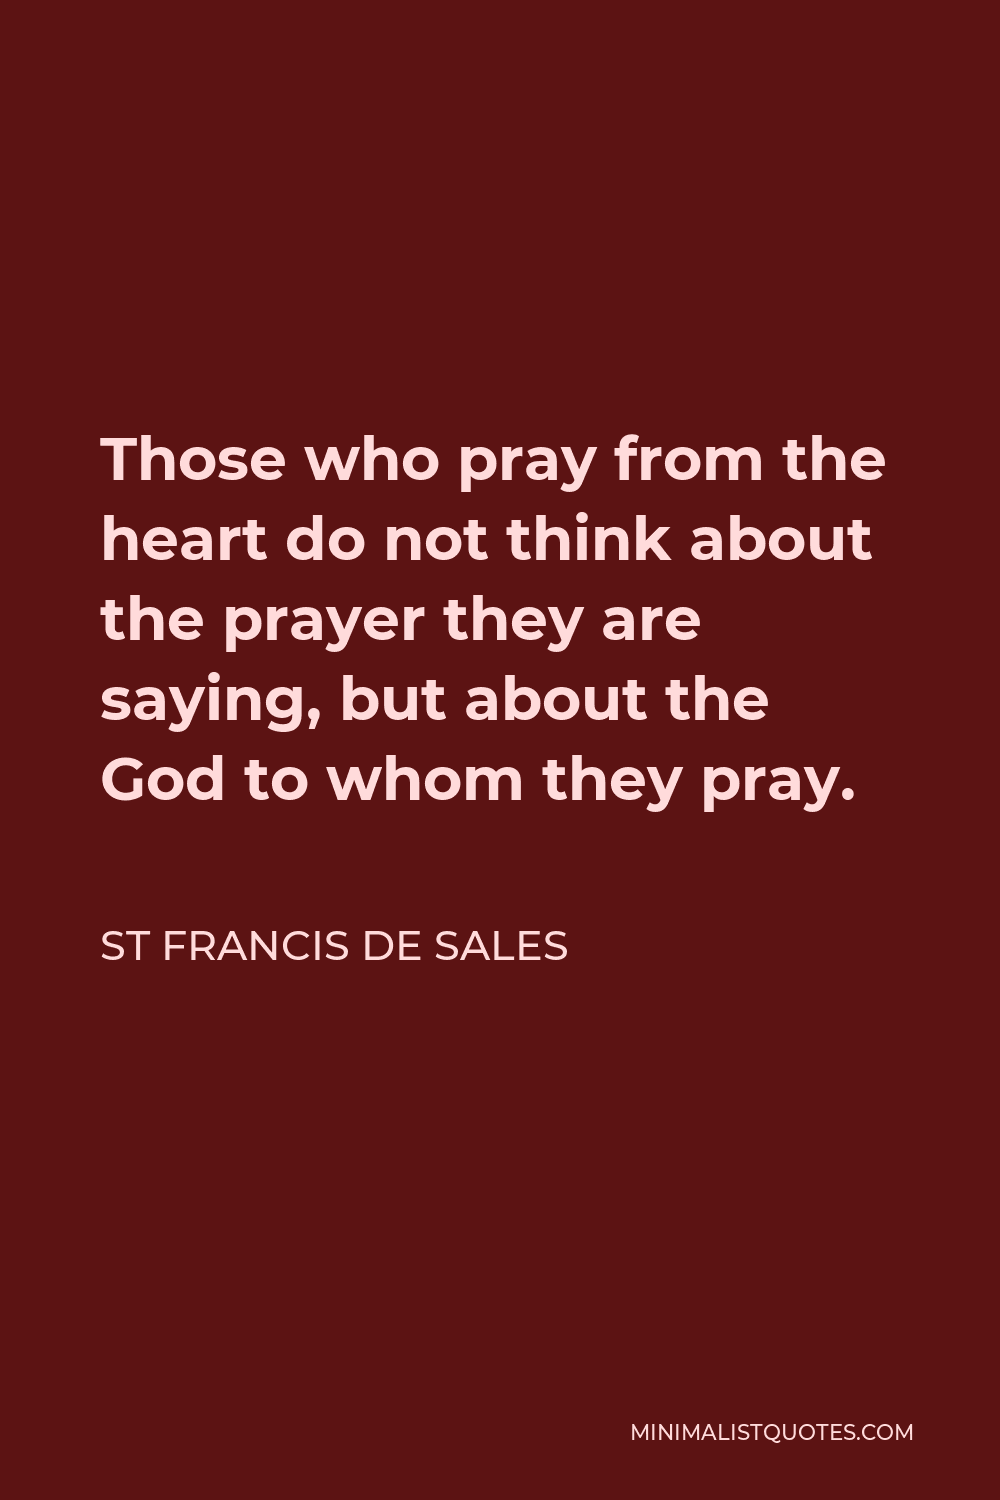 St Francis De Sales Quote - Those who pray from the heart do not think about the prayer they are saying, but about the God to whom they pray.